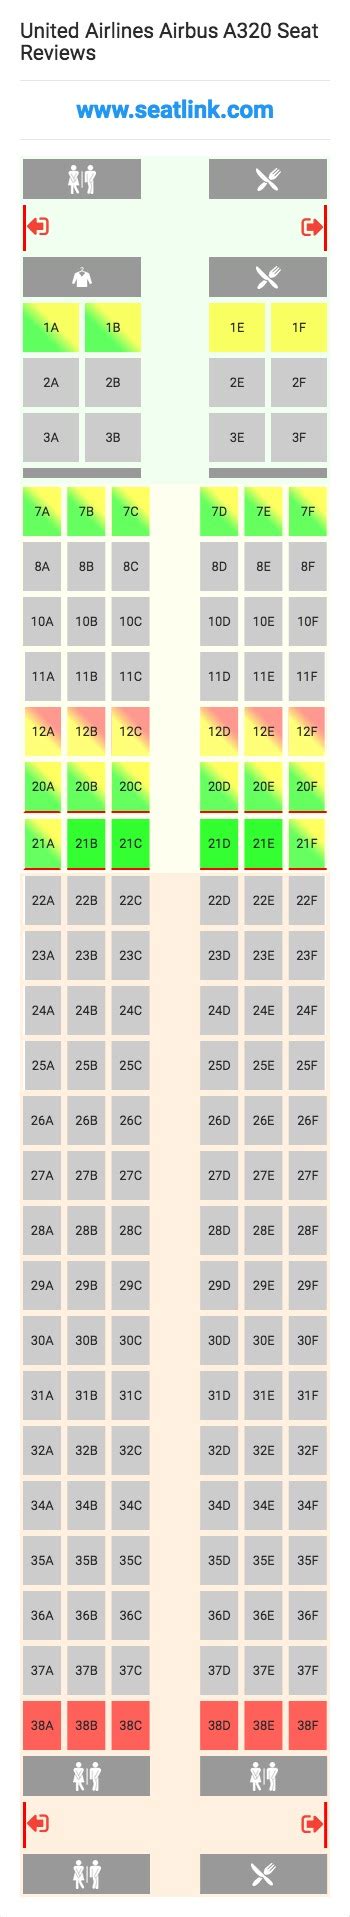 Airbus Industrie A320 Seating Chart United Awesome Home